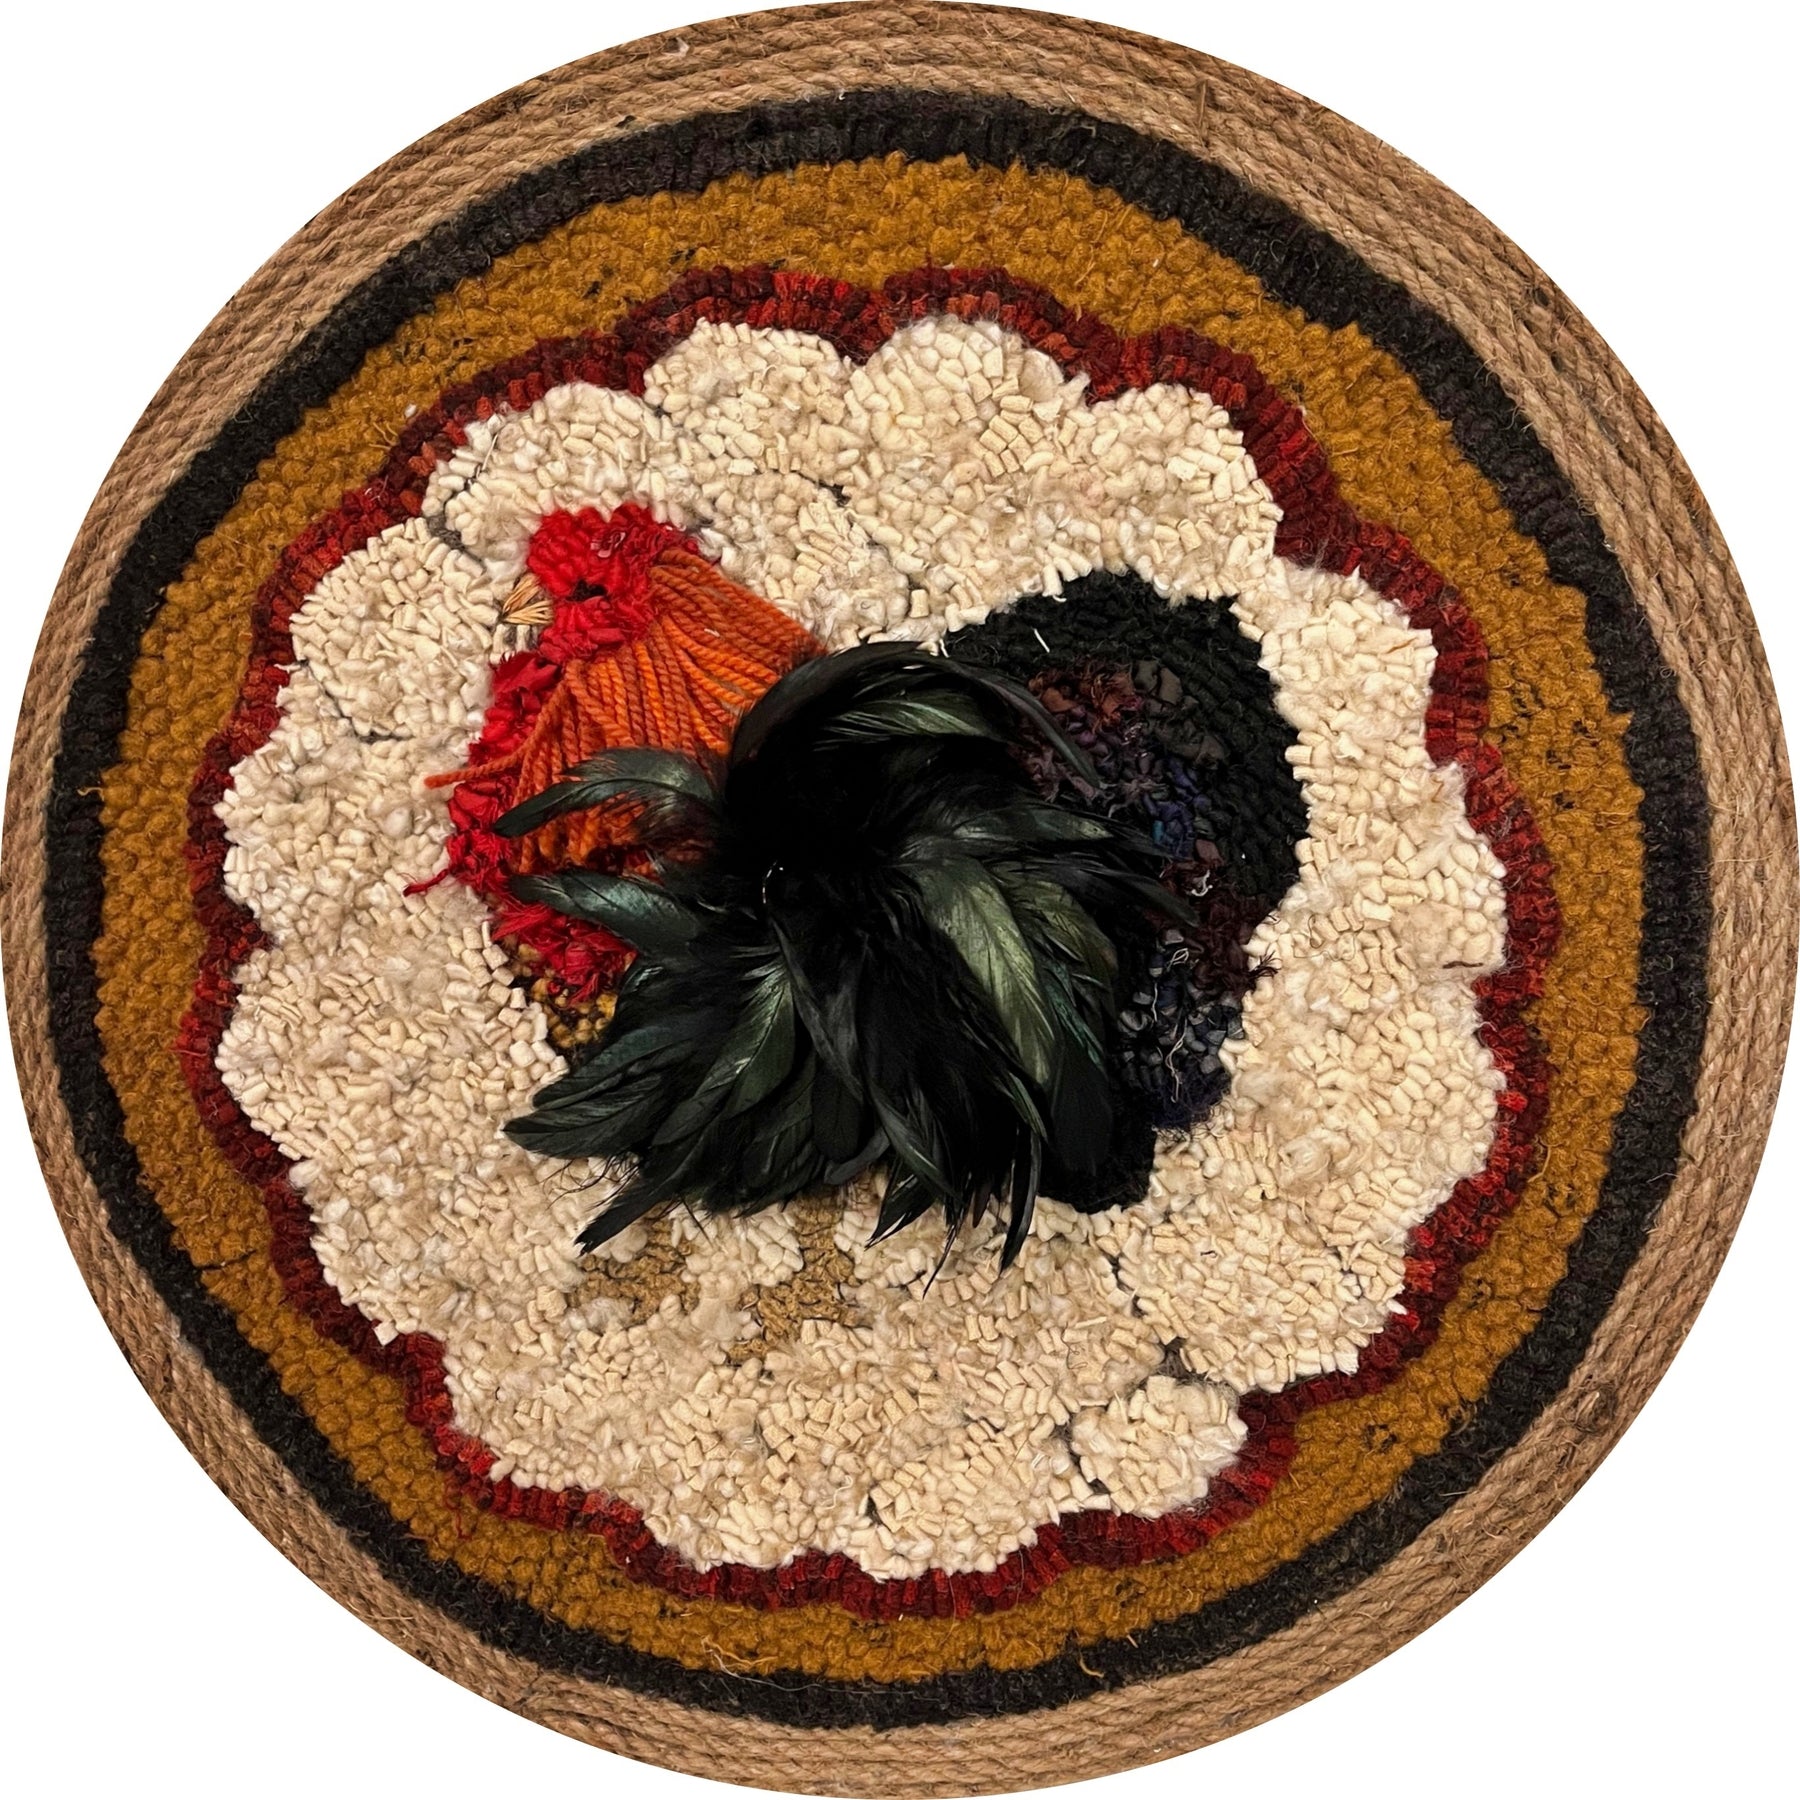 Rooster, rug hooked by Lisa Hoaper